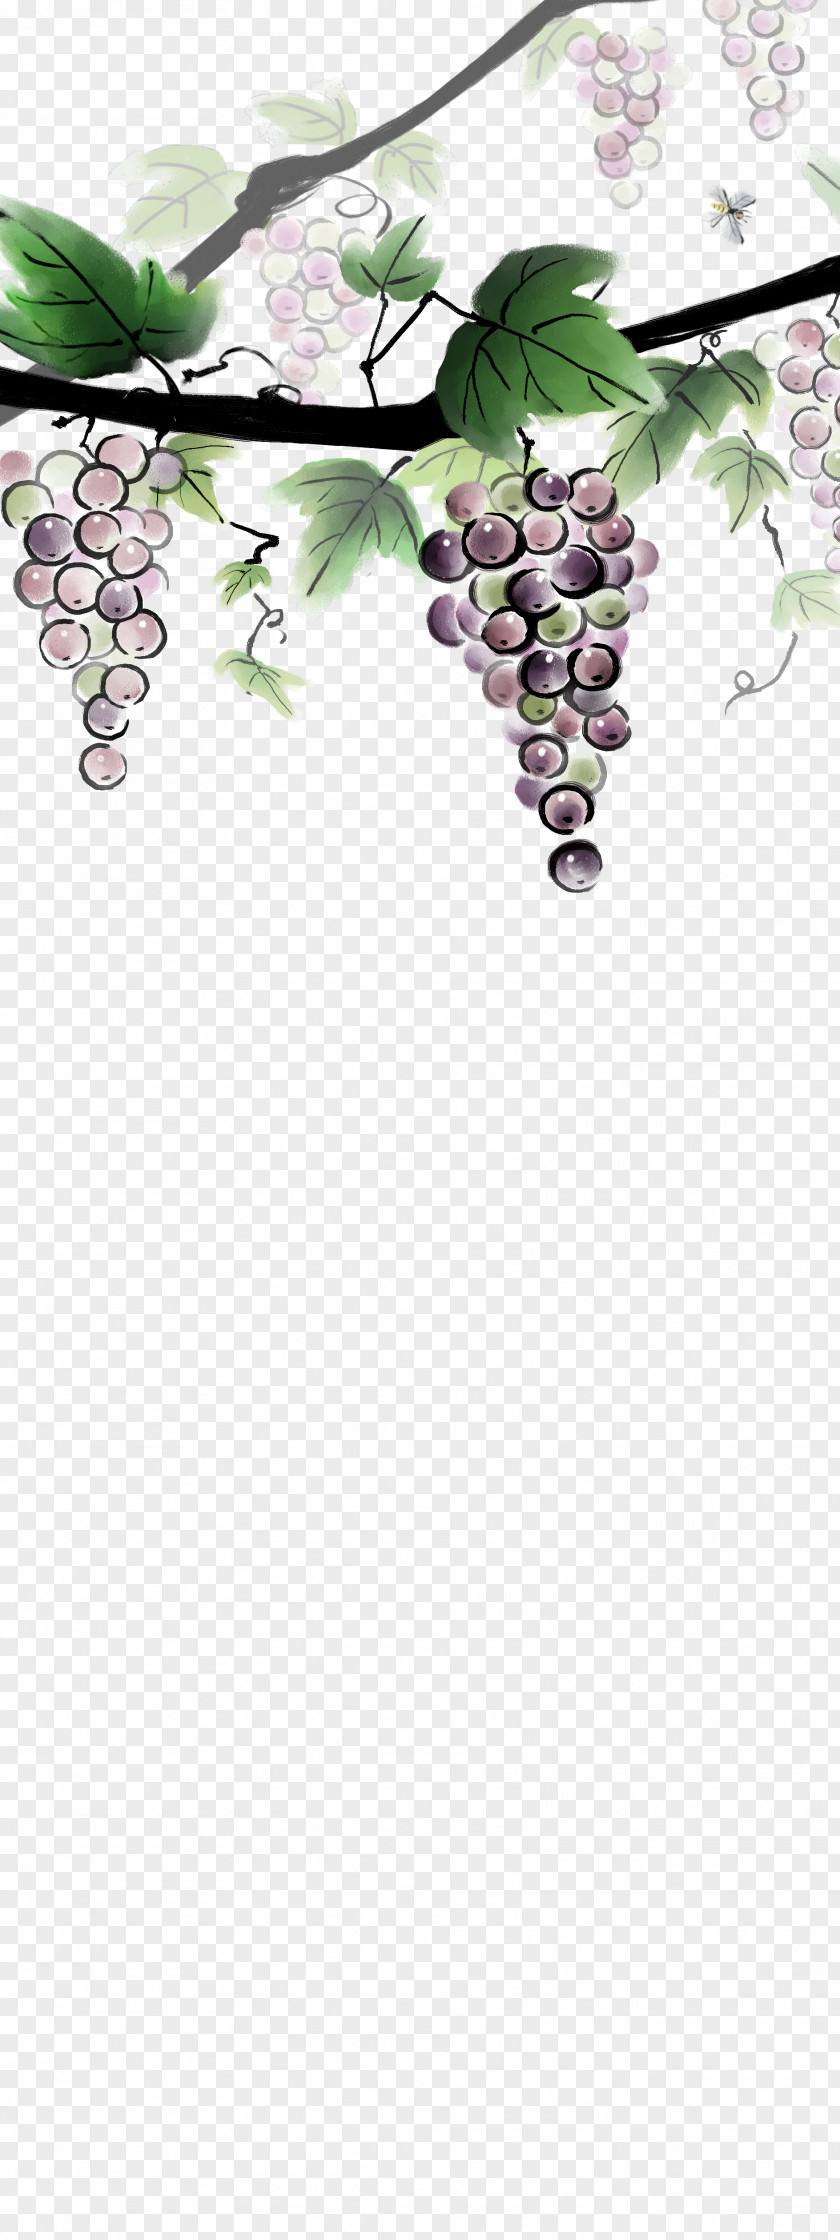 Grape Ink Wash Painting Download PNG